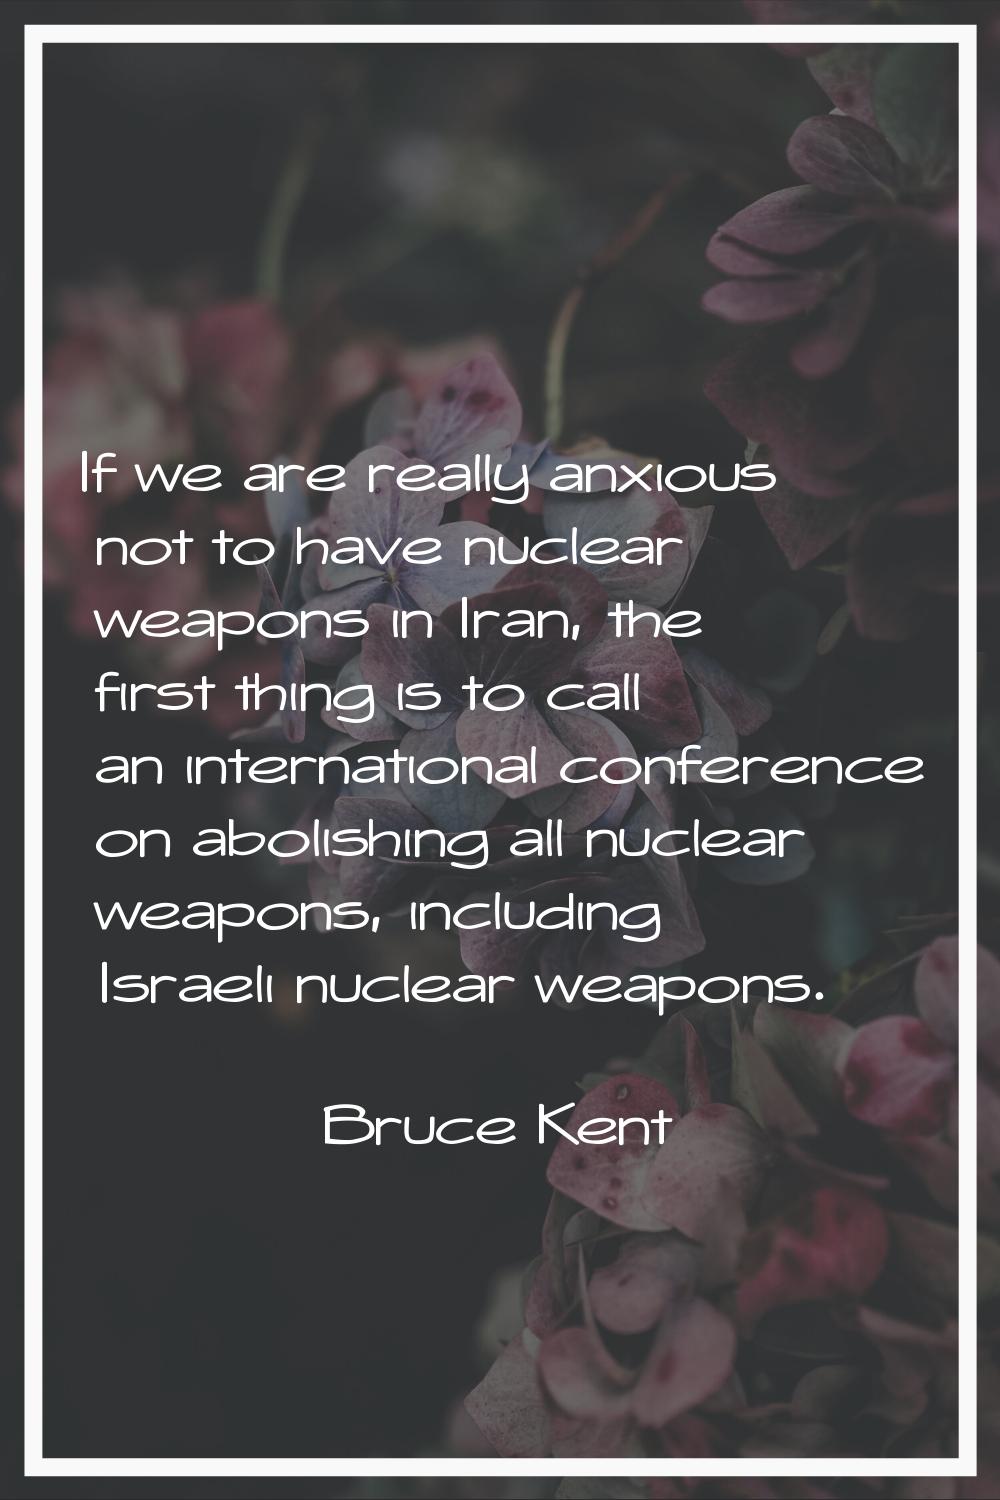 If we are really anxious not to have nuclear weapons in Iran, the first thing is to call an interna